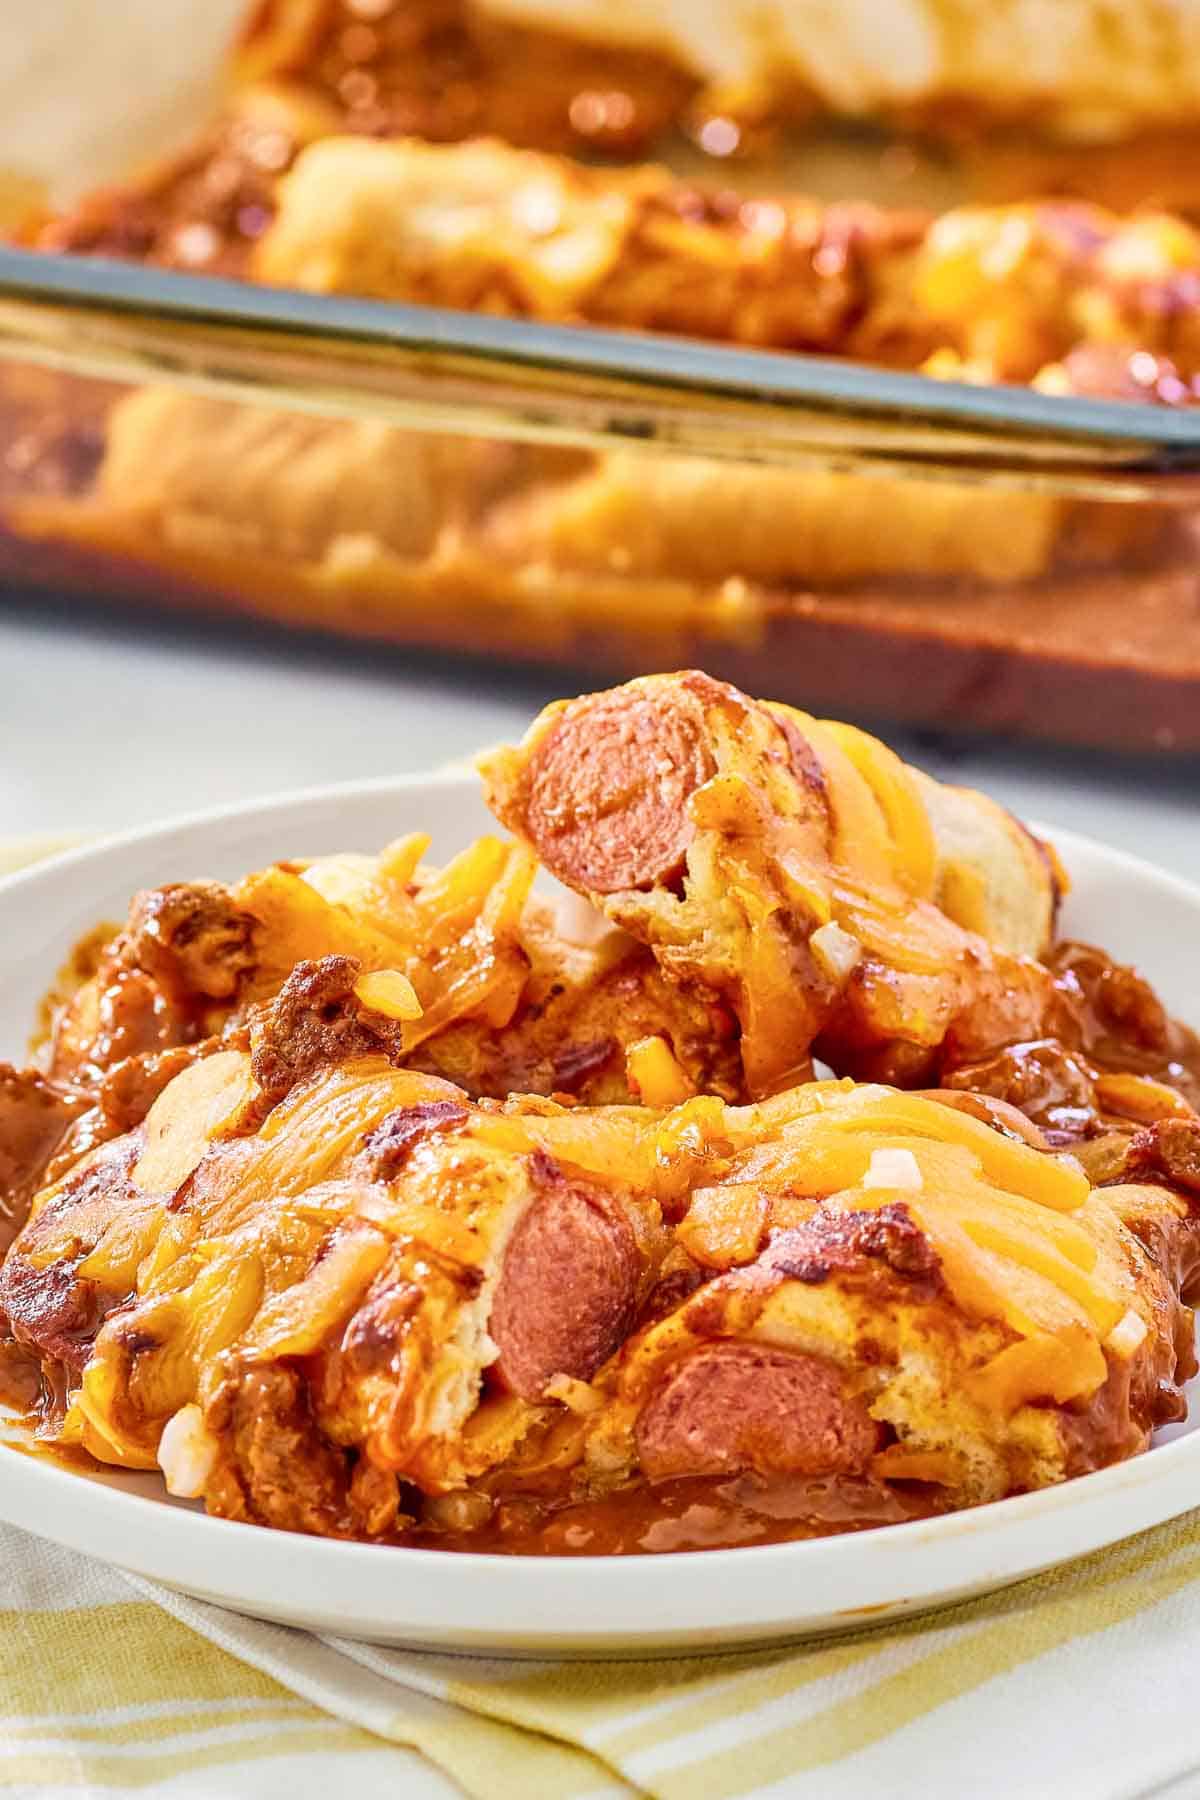 Chili dog casserole on a plate and in a baking dish.